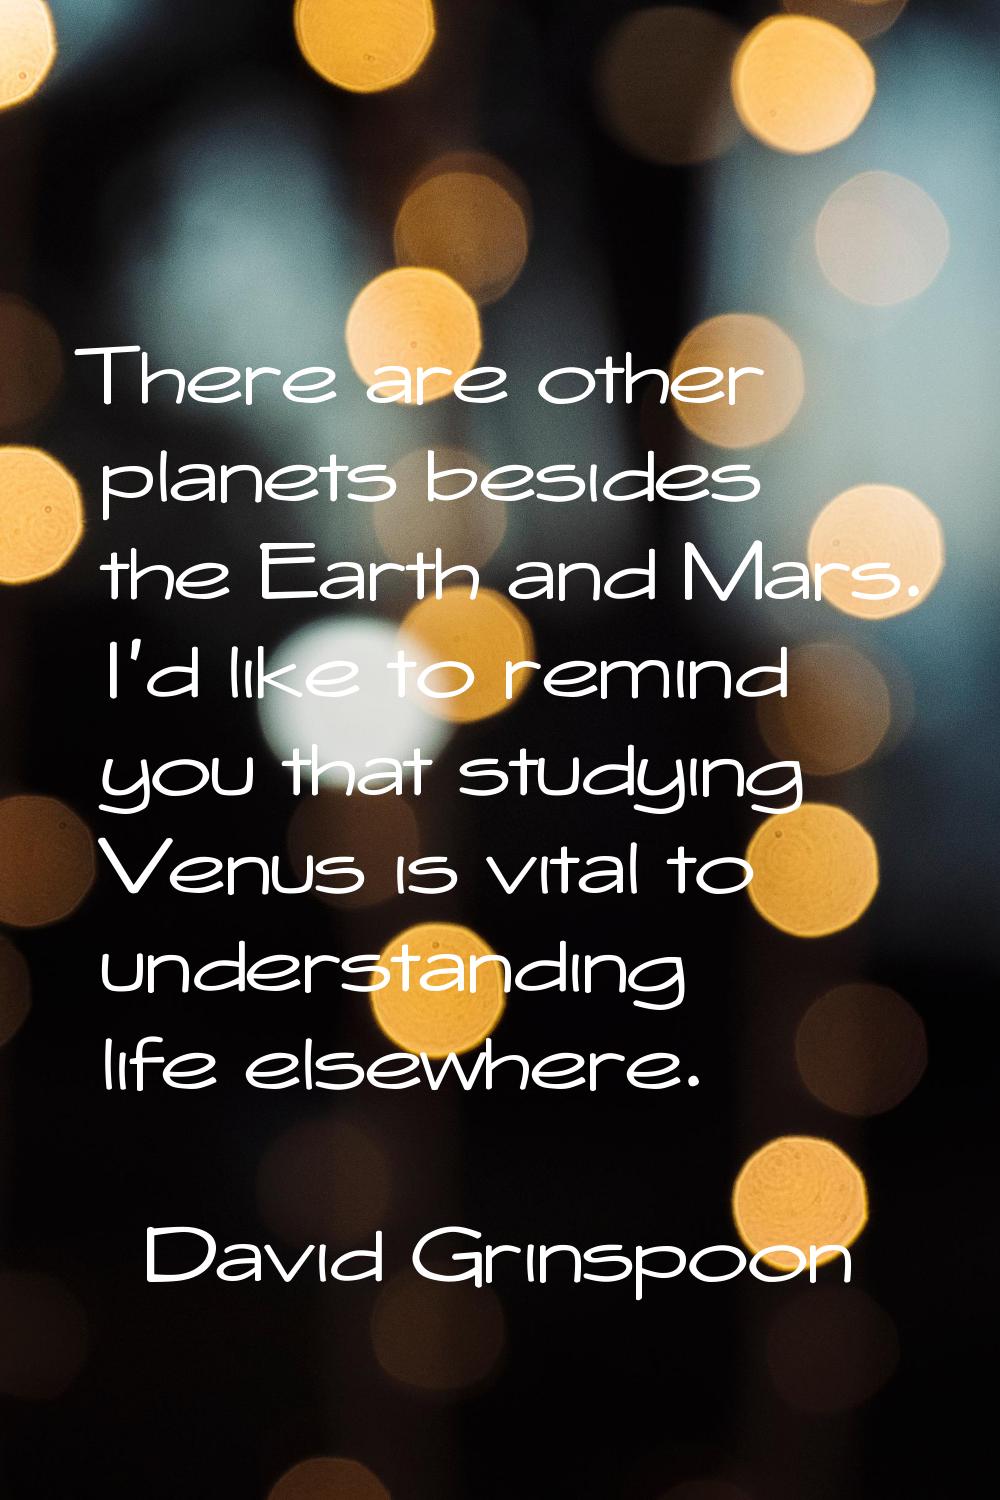 There are other planets besides the Earth and Mars. I'd like to remind you that studying Venus is v